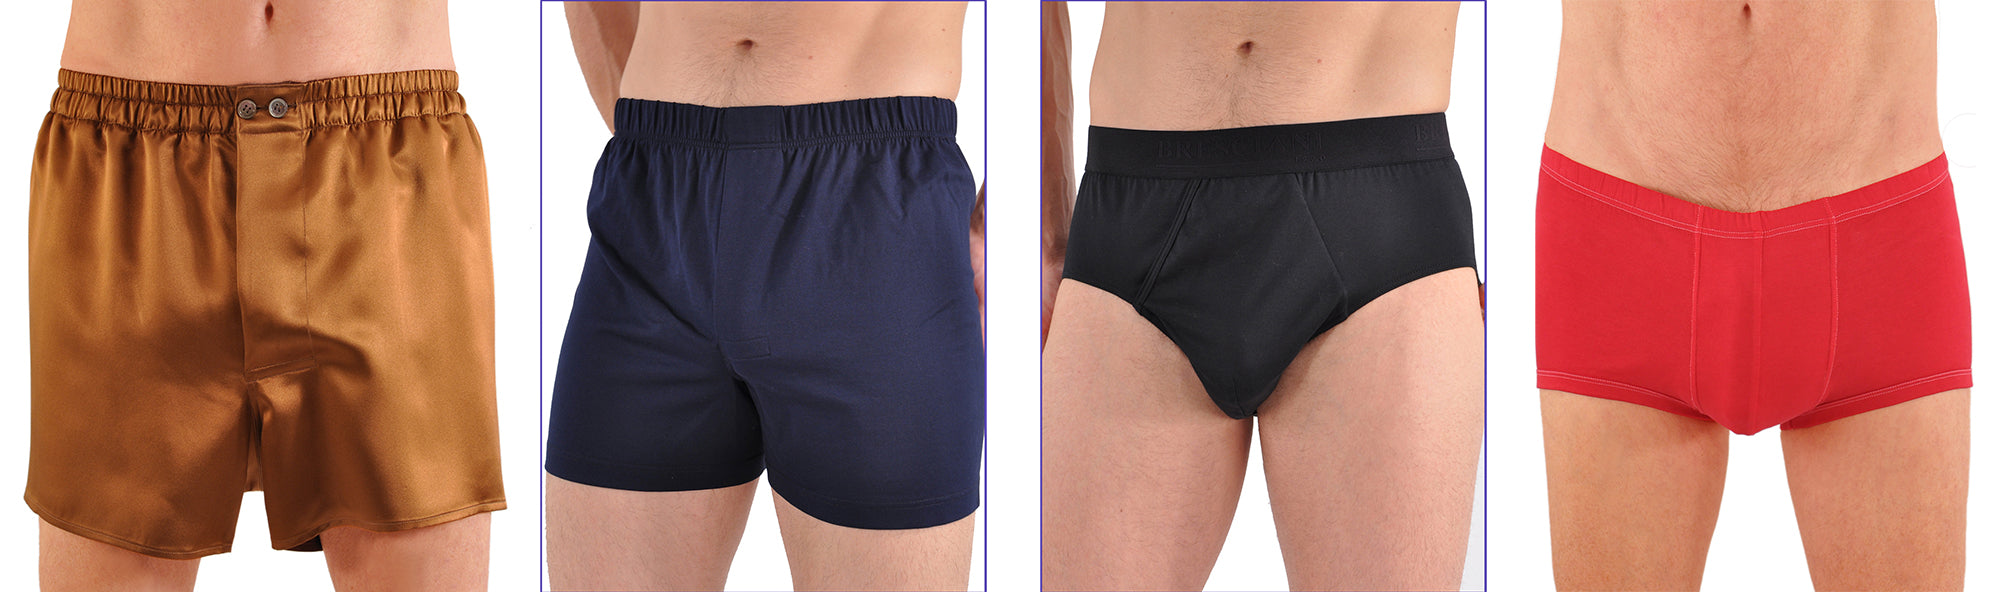 Girls, have you ever worn t-front underwear? And if so,  why? -  GirlsAskGuys